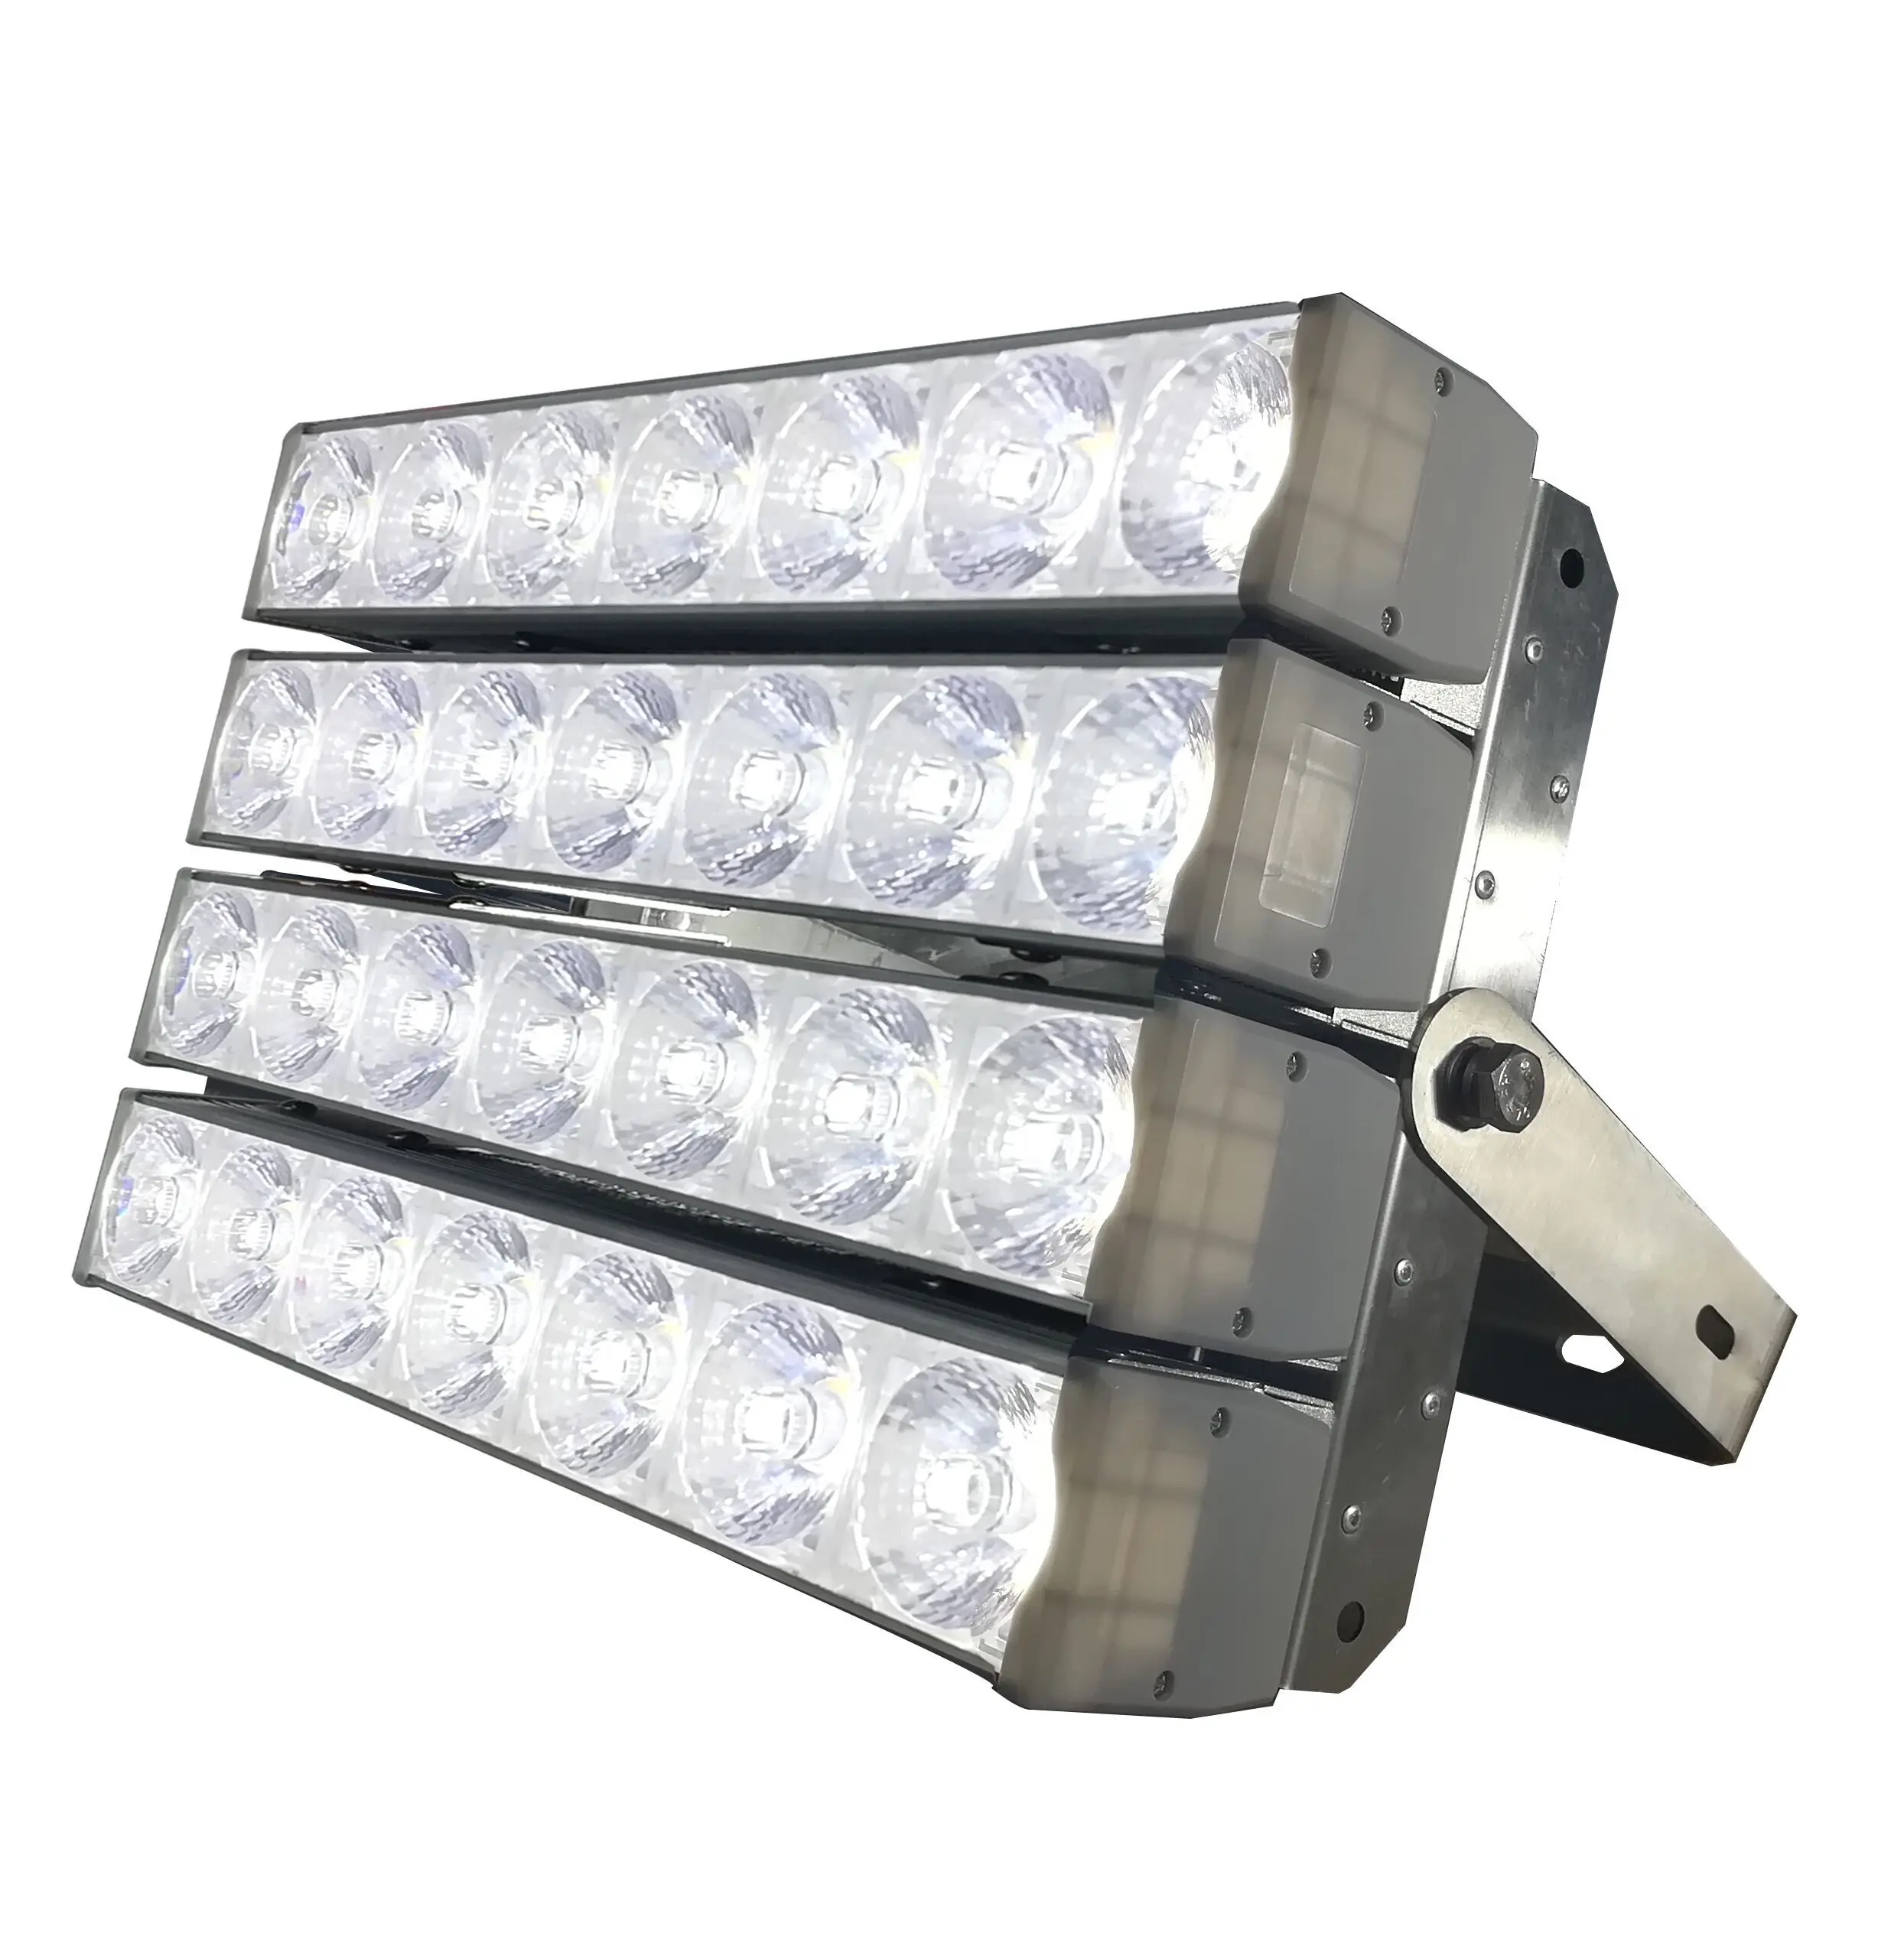 factory price led lights spot lights 300w with motion sensor for 1000w Metal halide lamp replace for truck heavy duty lighting